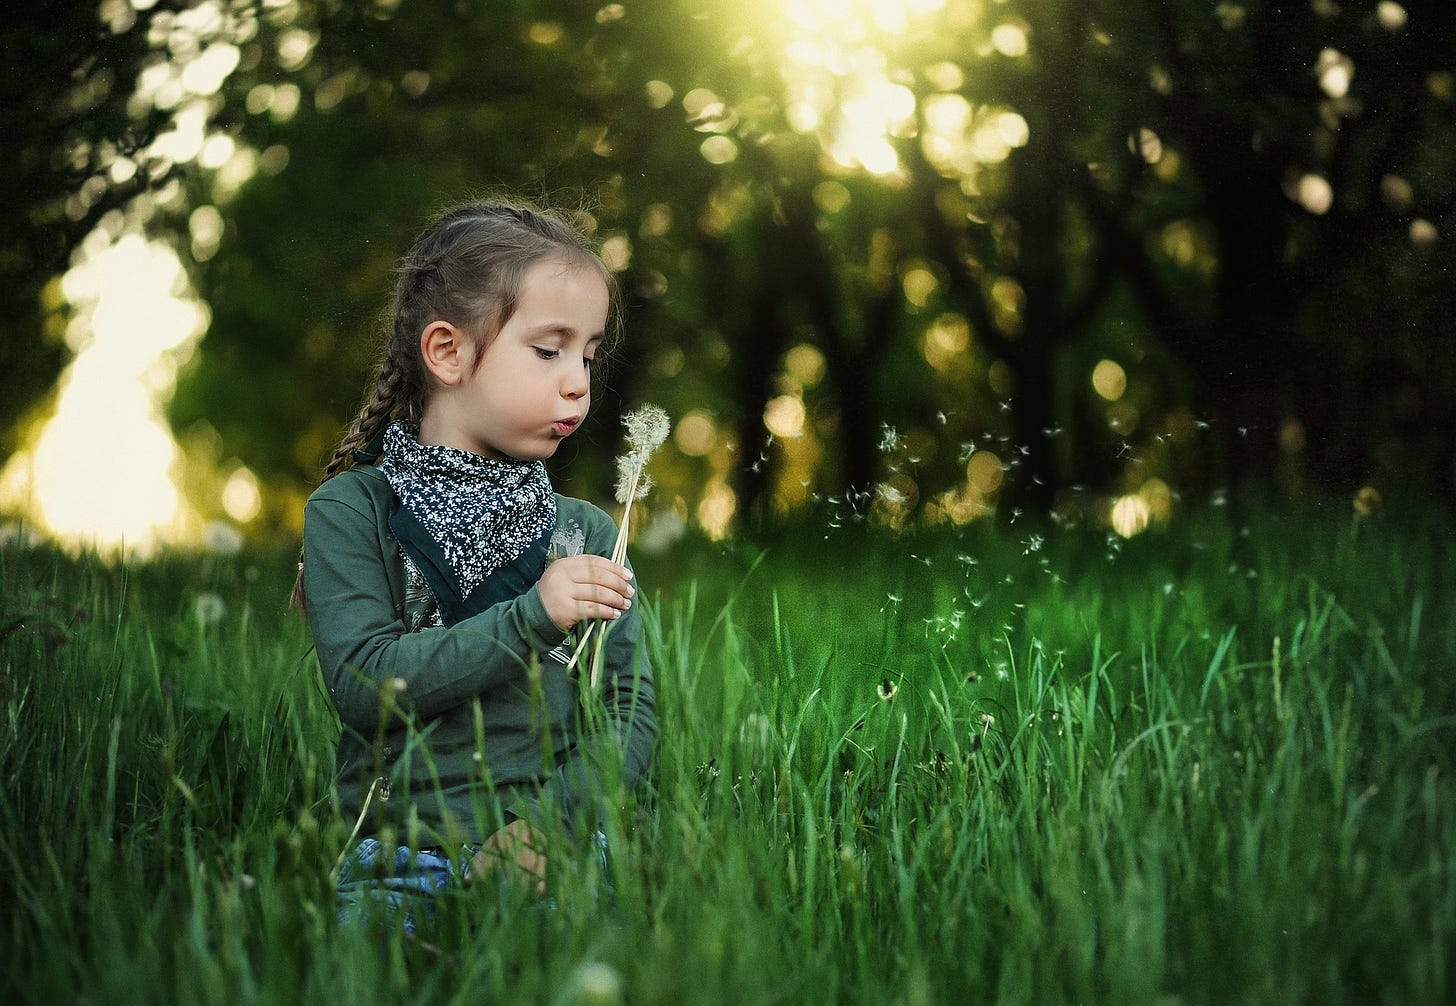 Young girl in a field, blowing dandelions